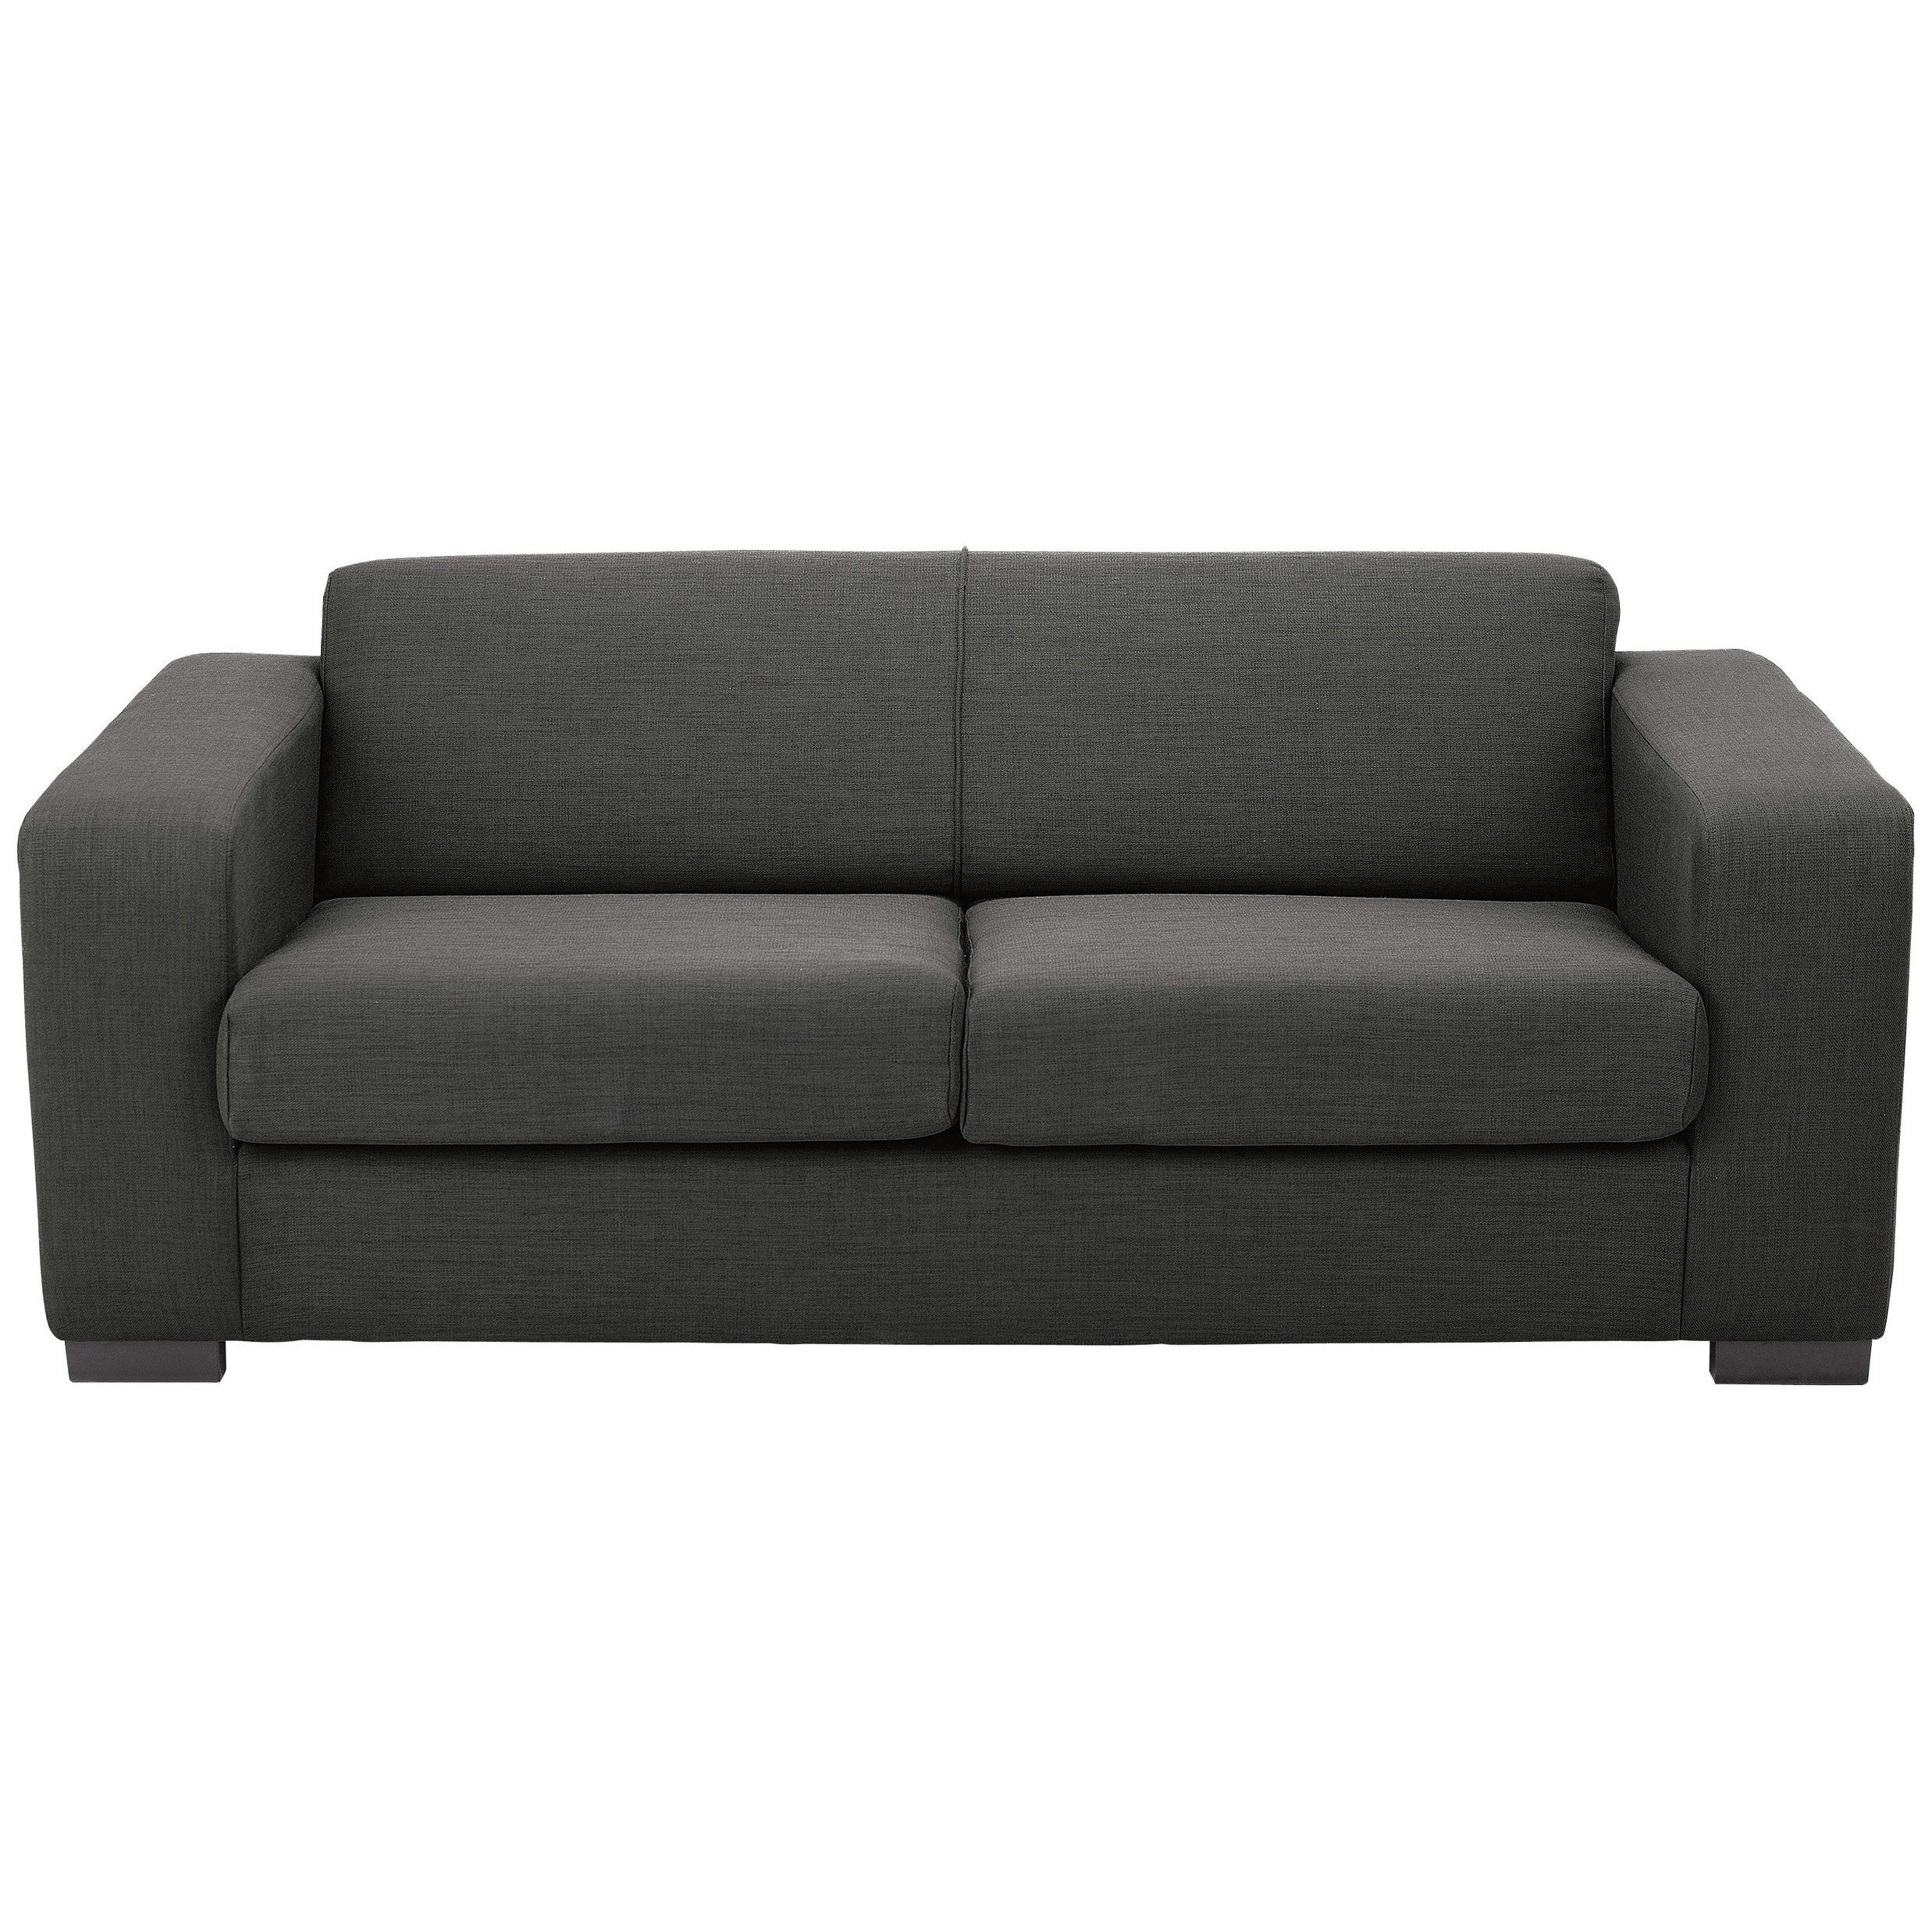 Argos Home New Ava 2 Seater Fabric  Sofa Bed - Charcoal - image 1